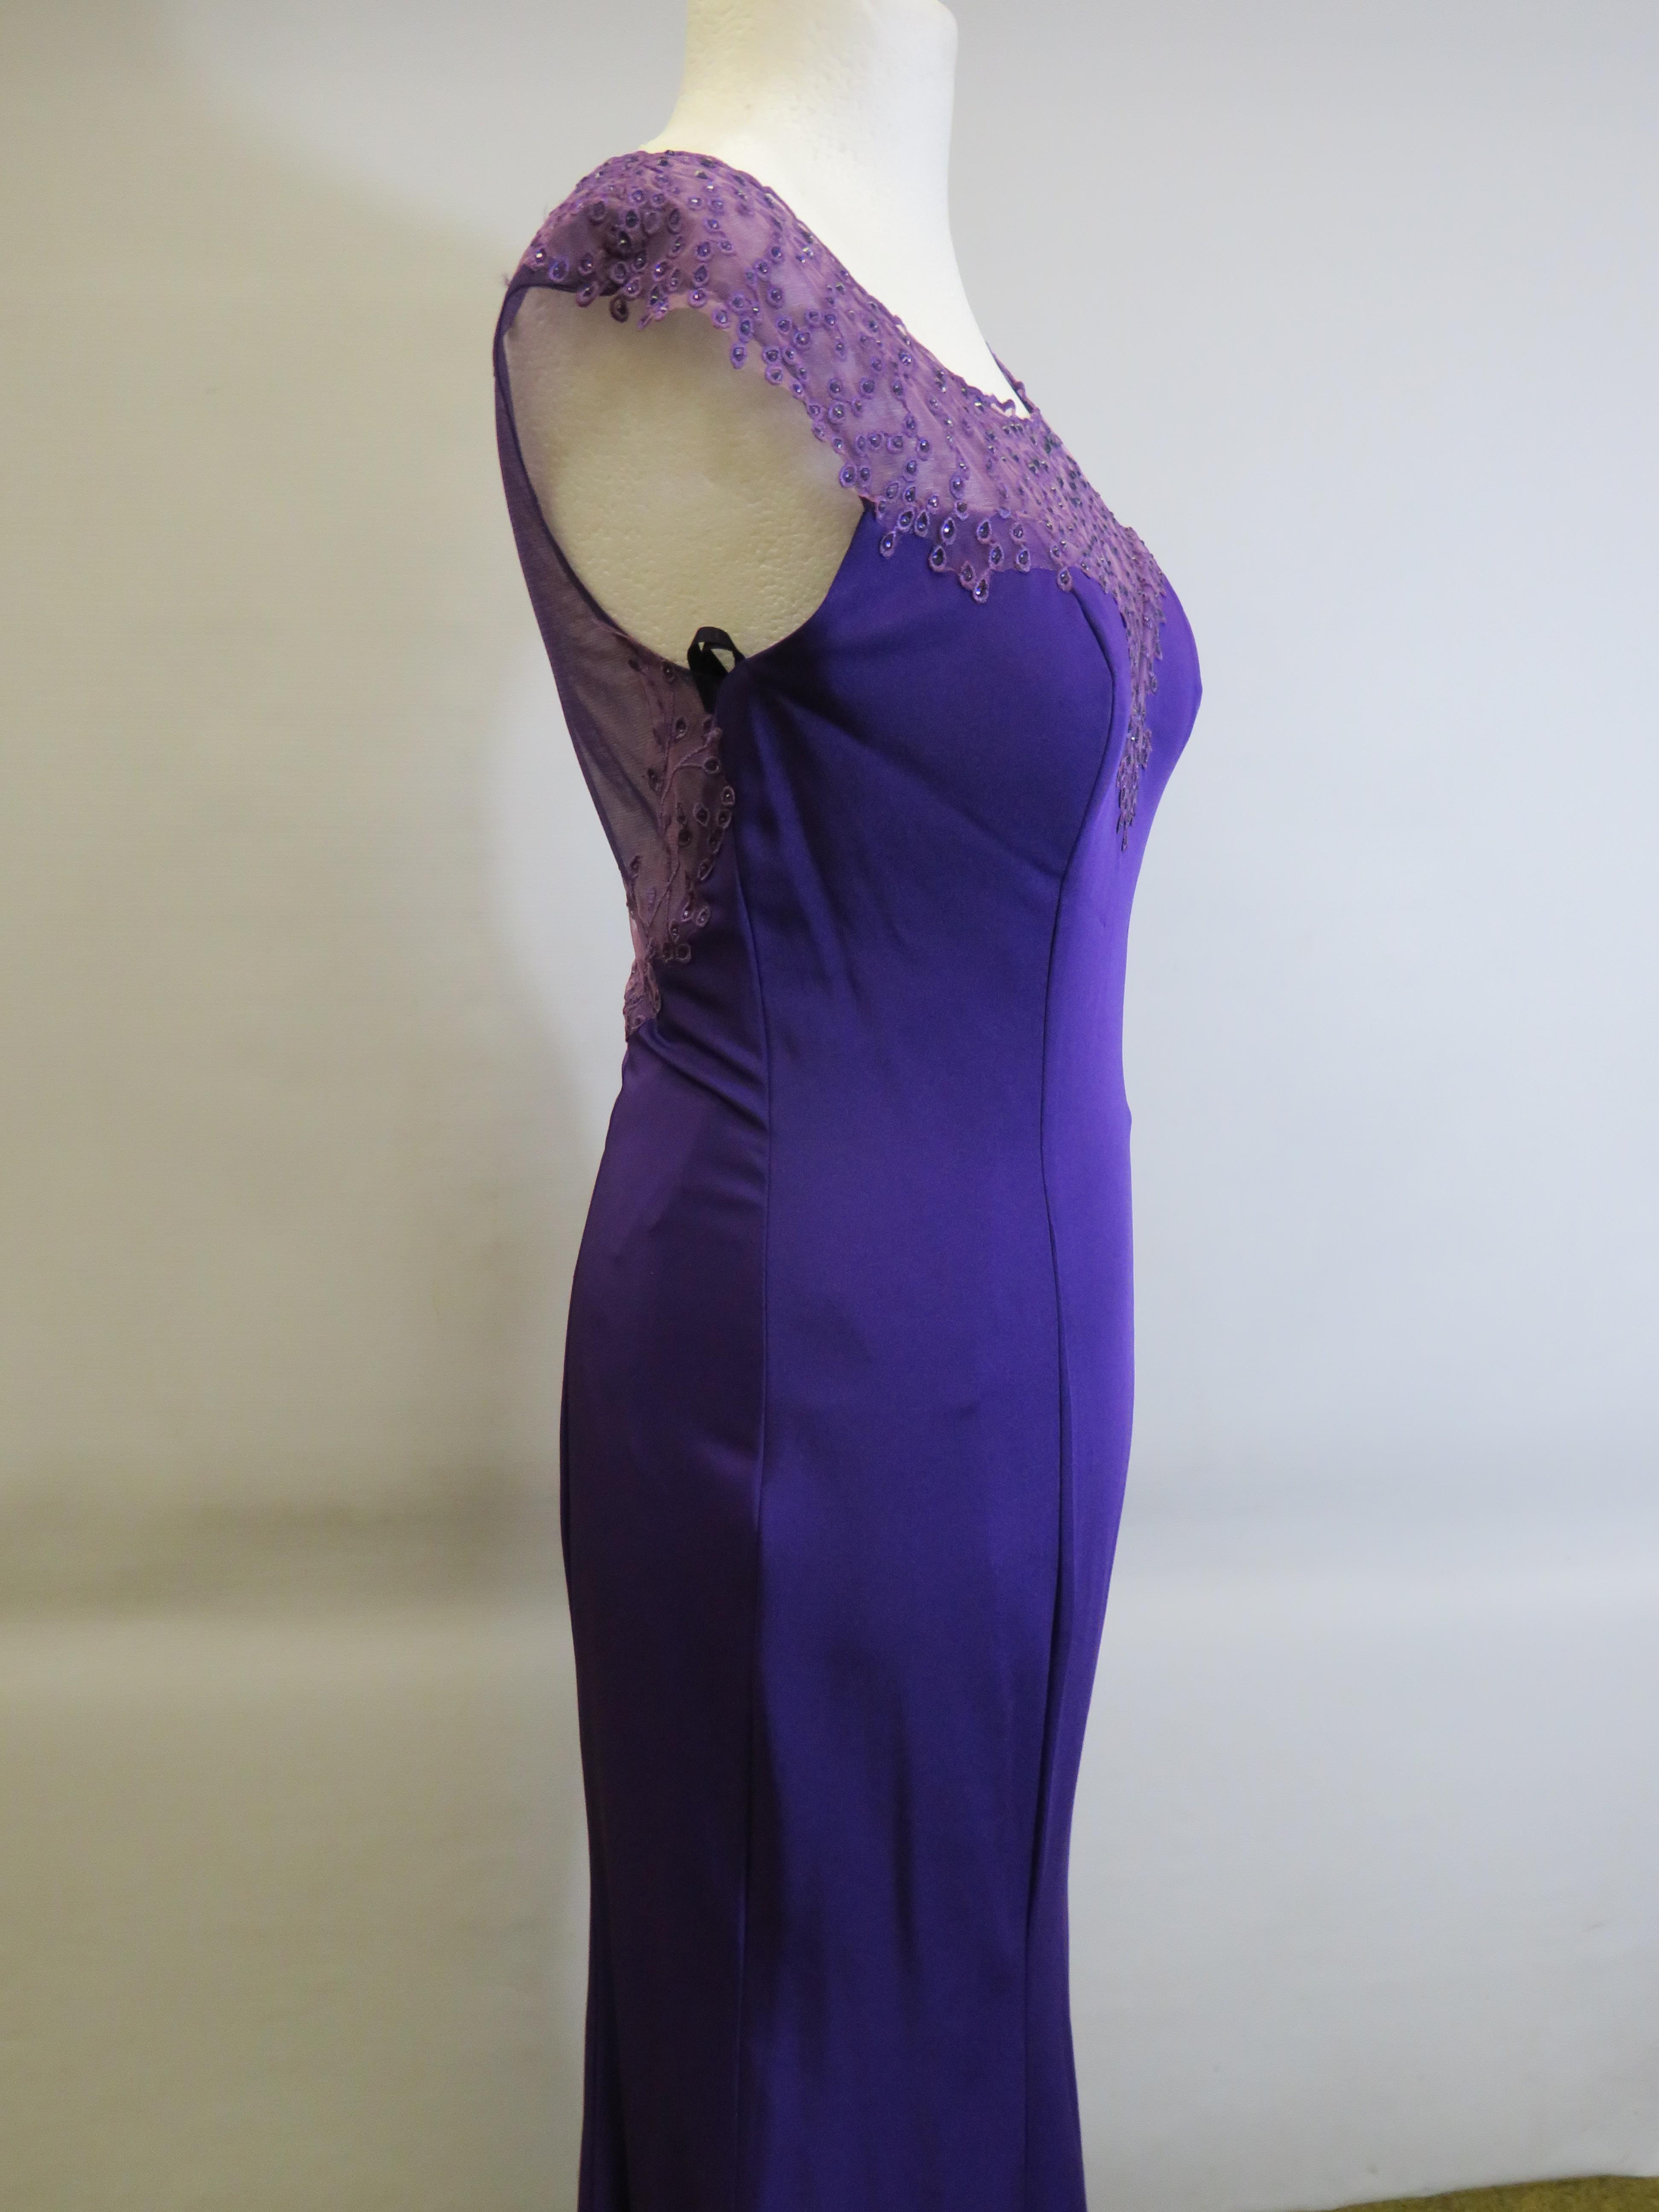 As New and unused Prom Dress or Ball Gown by Crystal Breeze in Purple. Side zip. UK size 14.  See ph - Image 3 of 6